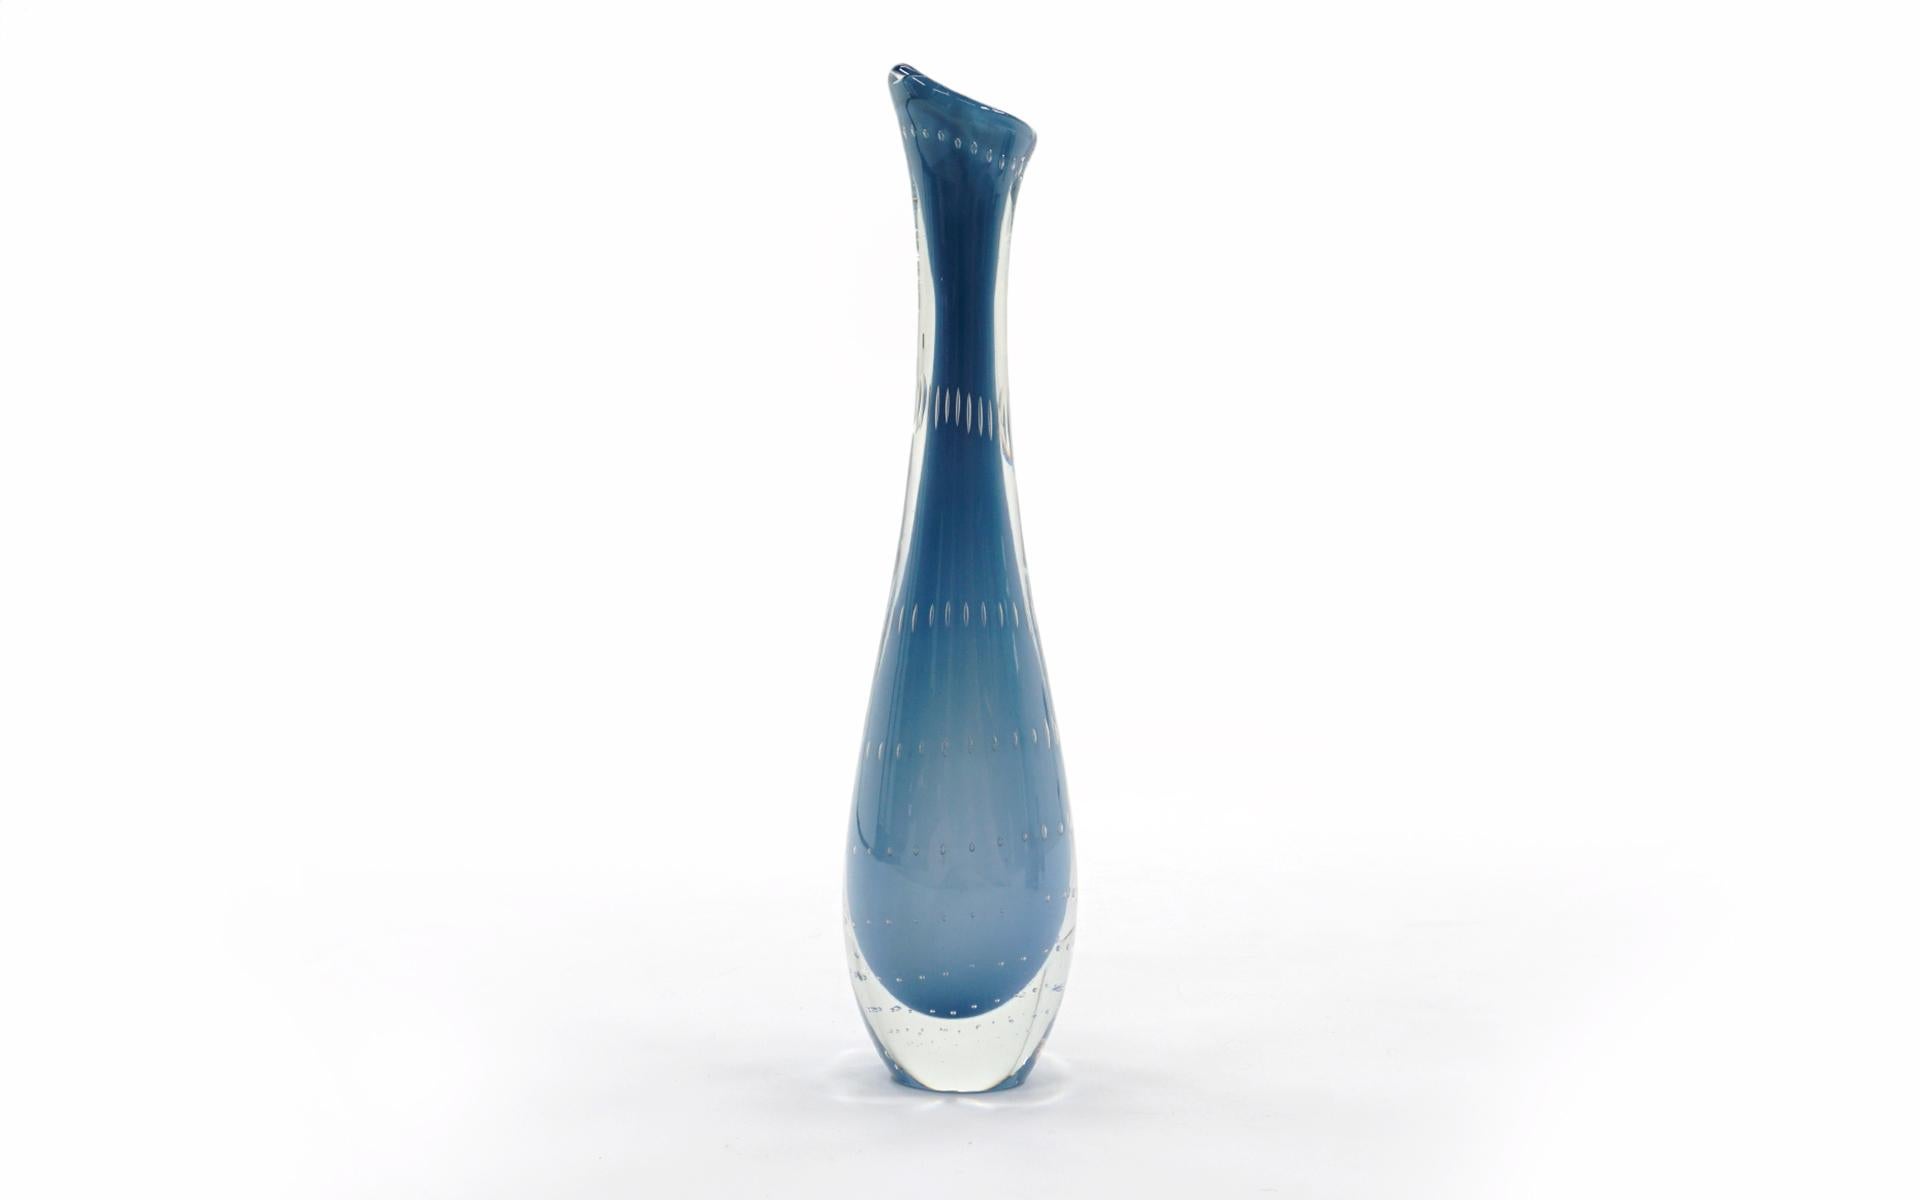 Swedish Mid Century Modern Blue Bud Glass Vase by Swedish glass artist Vicke Lindstrand for Kosta Boda circa 1950. No chips cracks or repairs.

Marked and numbered on bottom. 